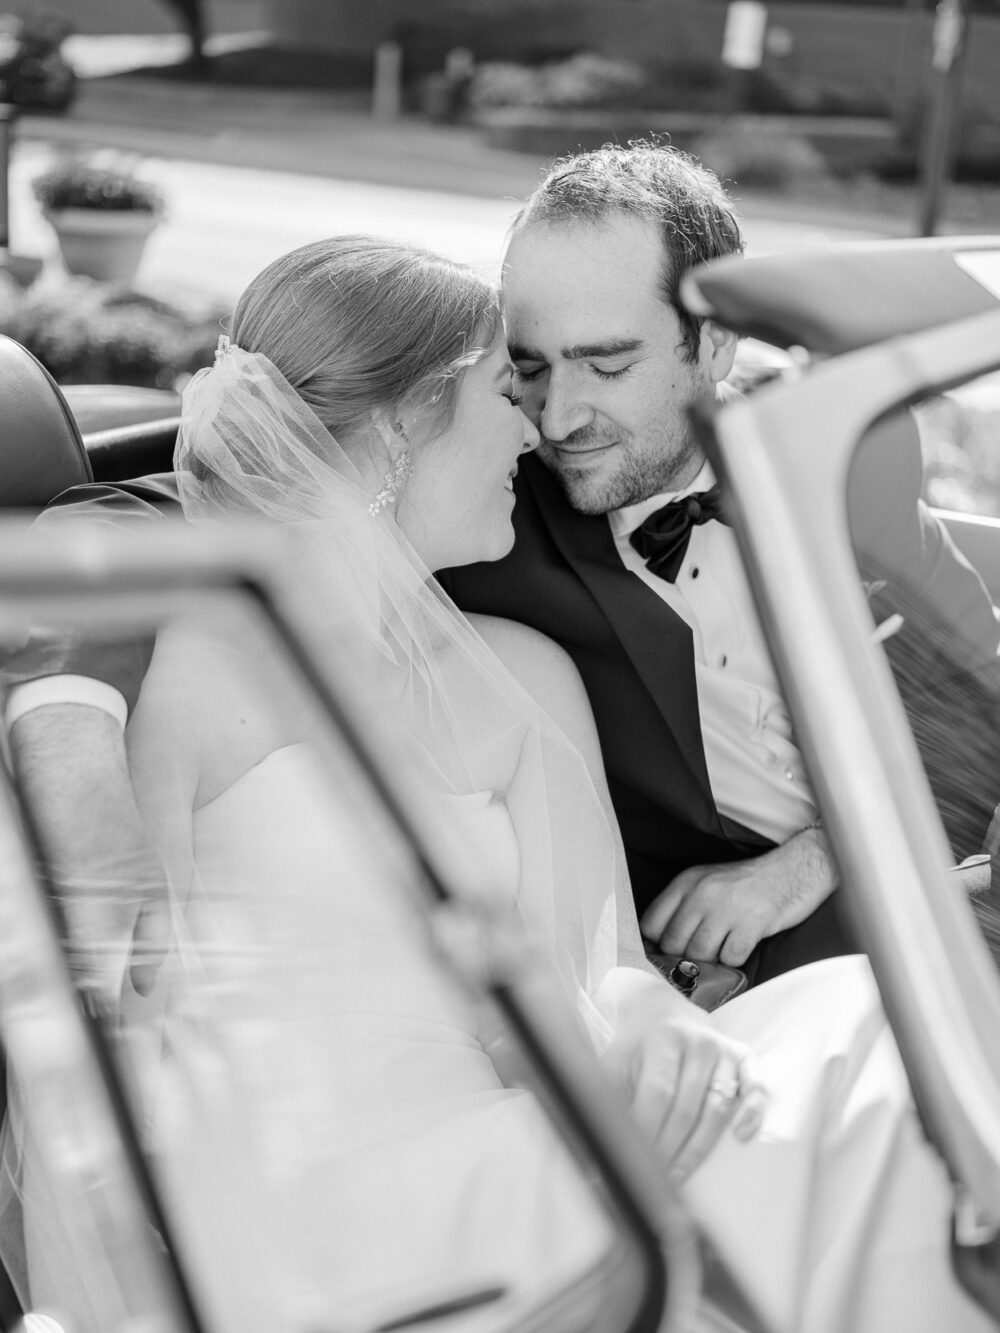 Bride and groom sharing a moment in a vintage car